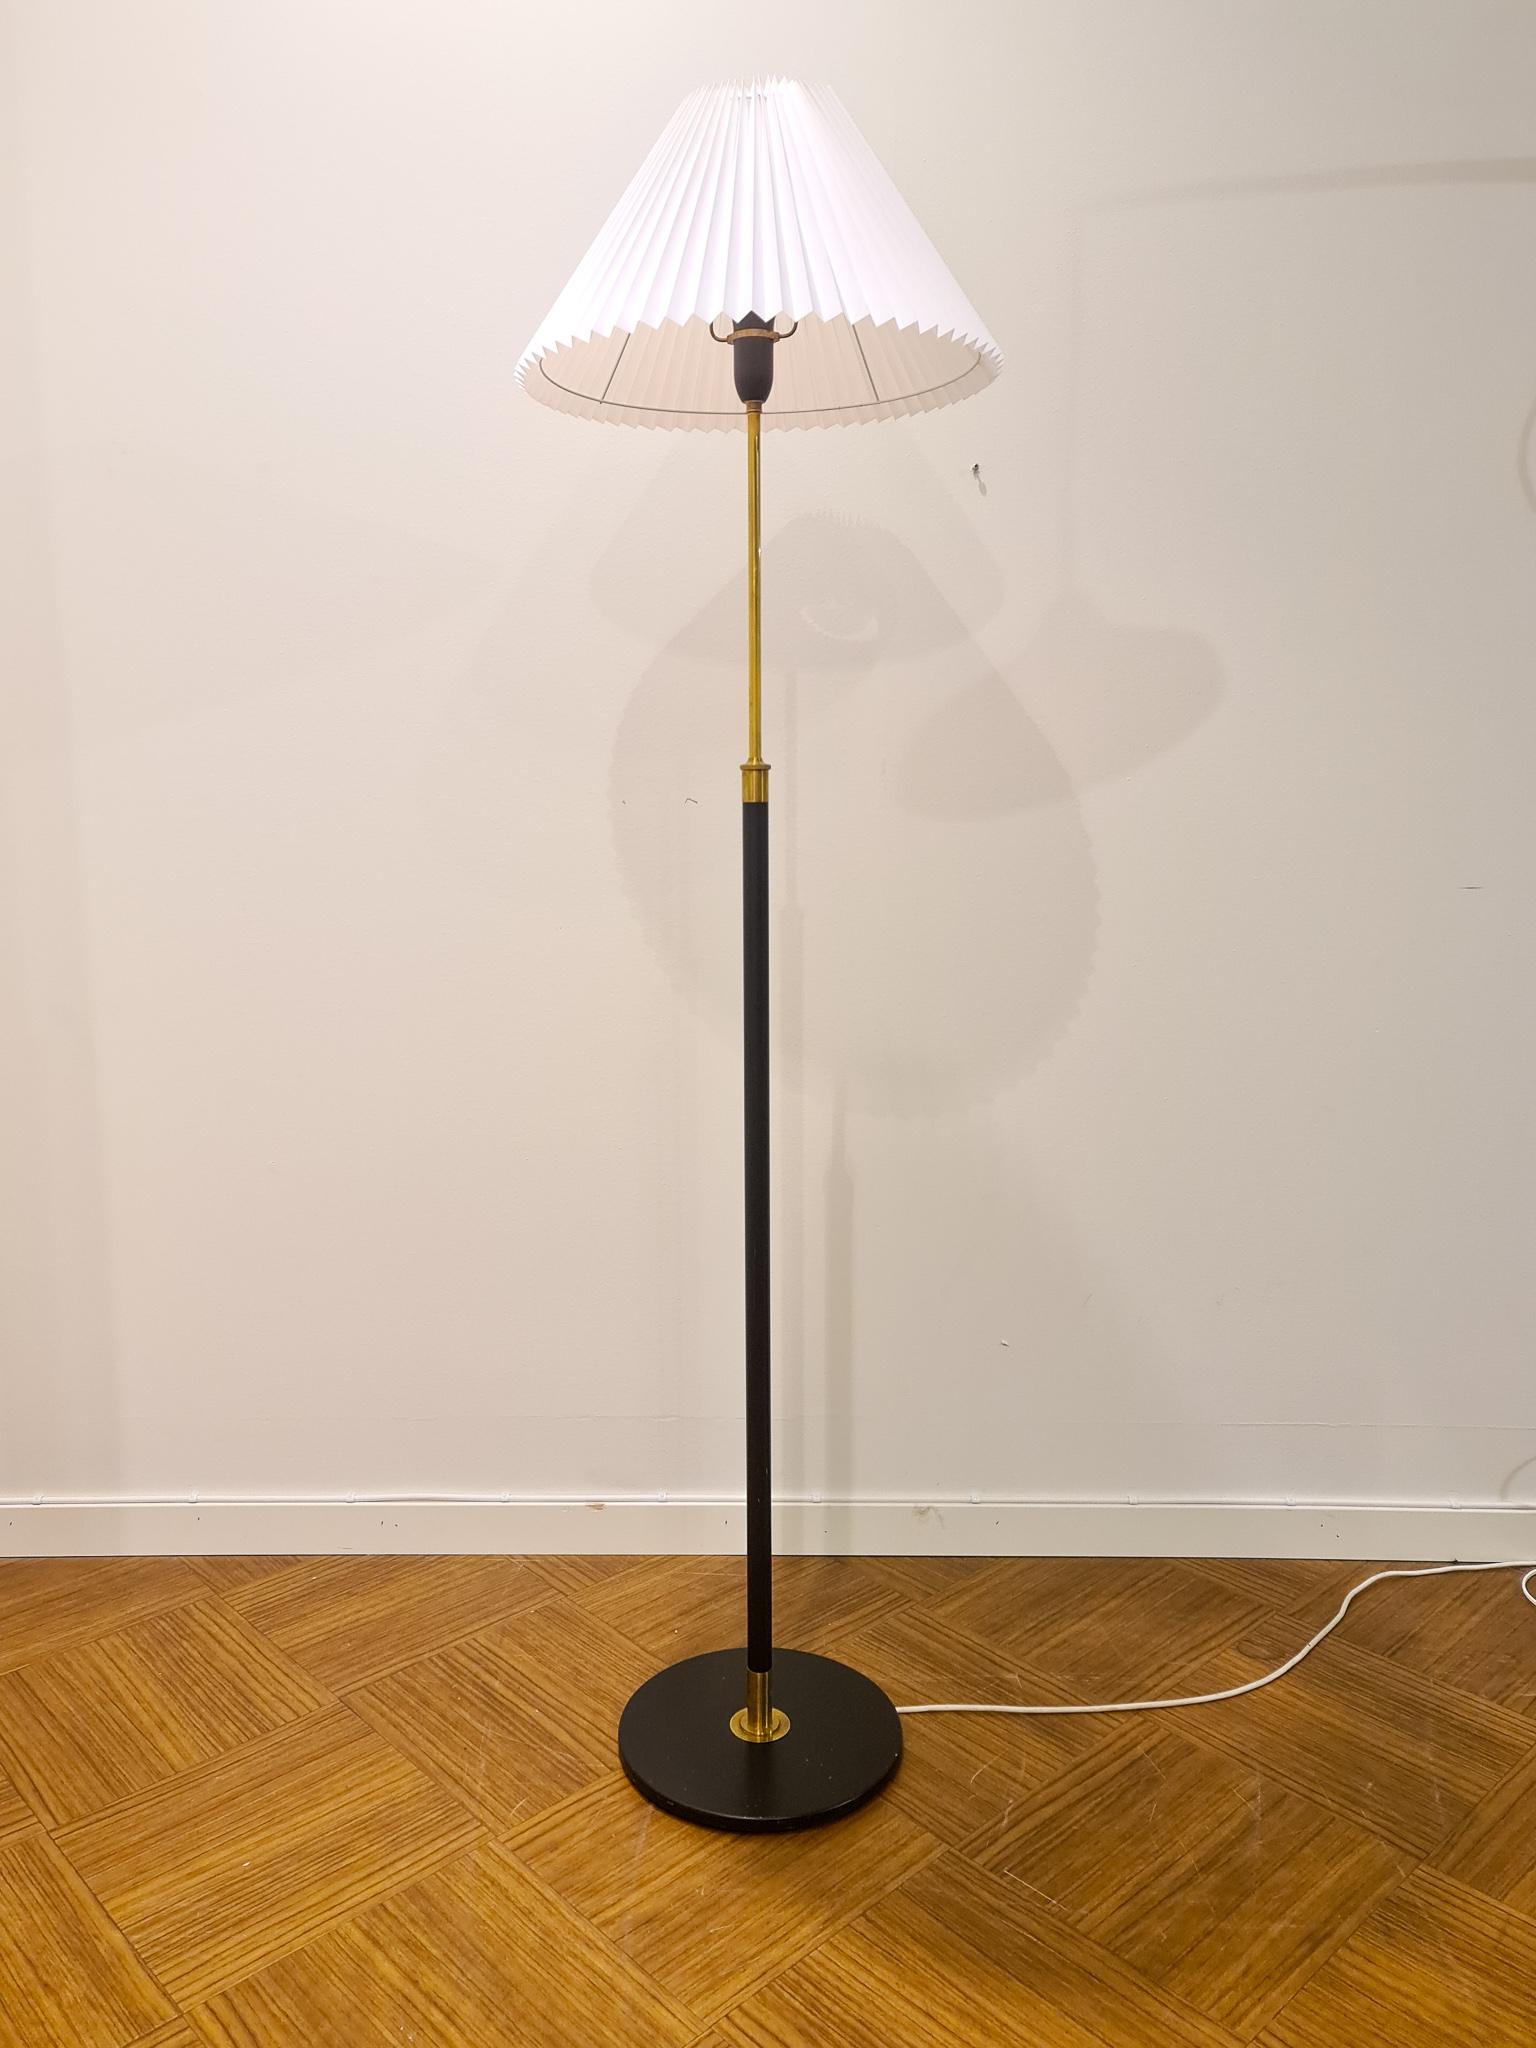 Wonderful adjustable floor lamp designed by Aage Petersen in Denmark. This one was produced in the 1970s.
This one is made in brass with a possibility to adjust the height.

Good vintage condition, rewired. Marks of use on the